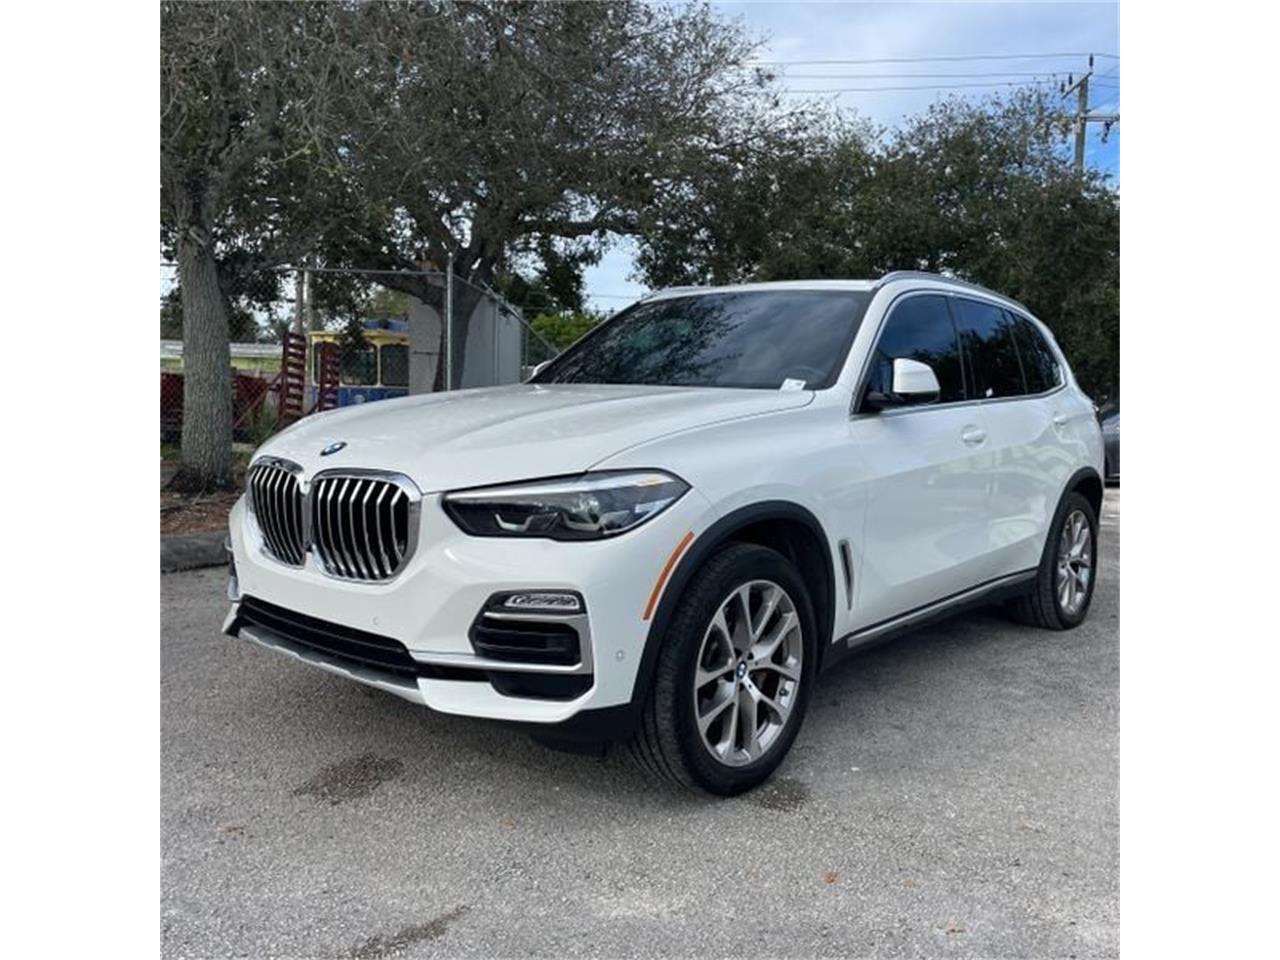 For Sale: 2021 BMW X5 in Fort Lauderdale, Florida for sale in Fort Lauderdale, FL